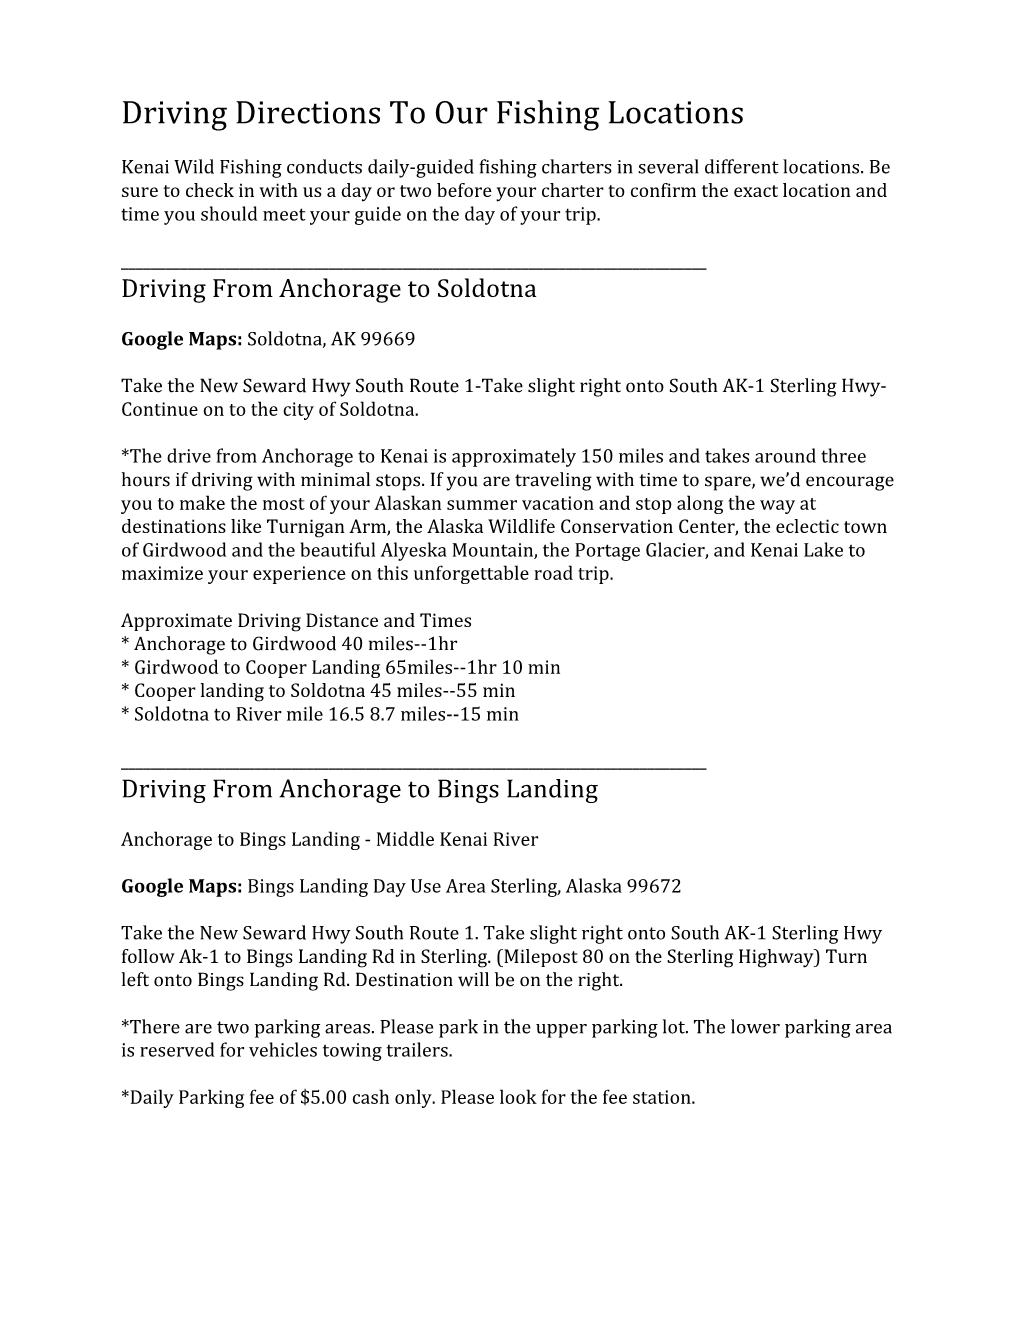 Driving Directions to Fishing Locations-PDF